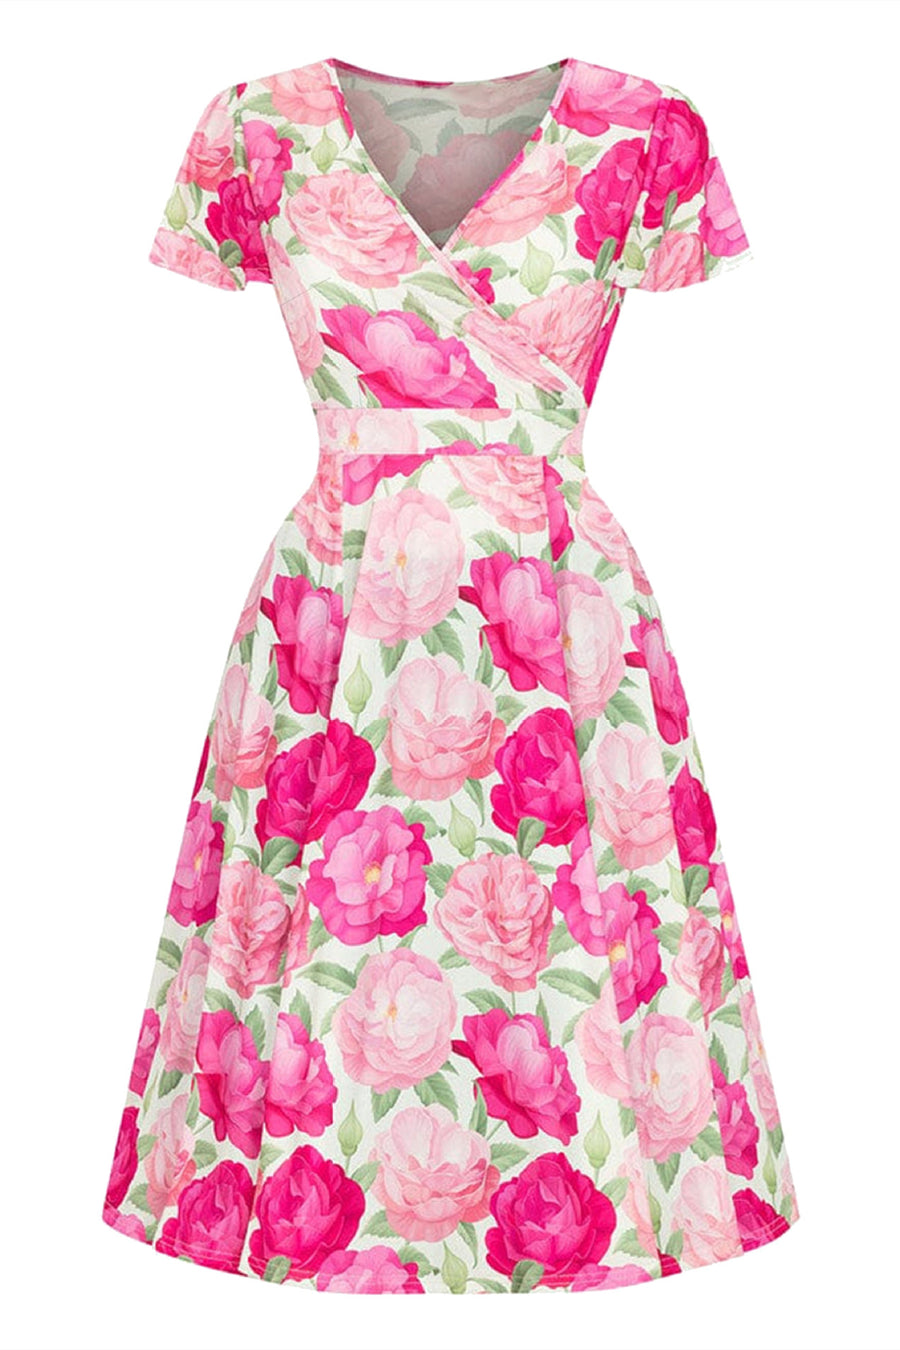 Pink Floral Wrap Dress with Sash